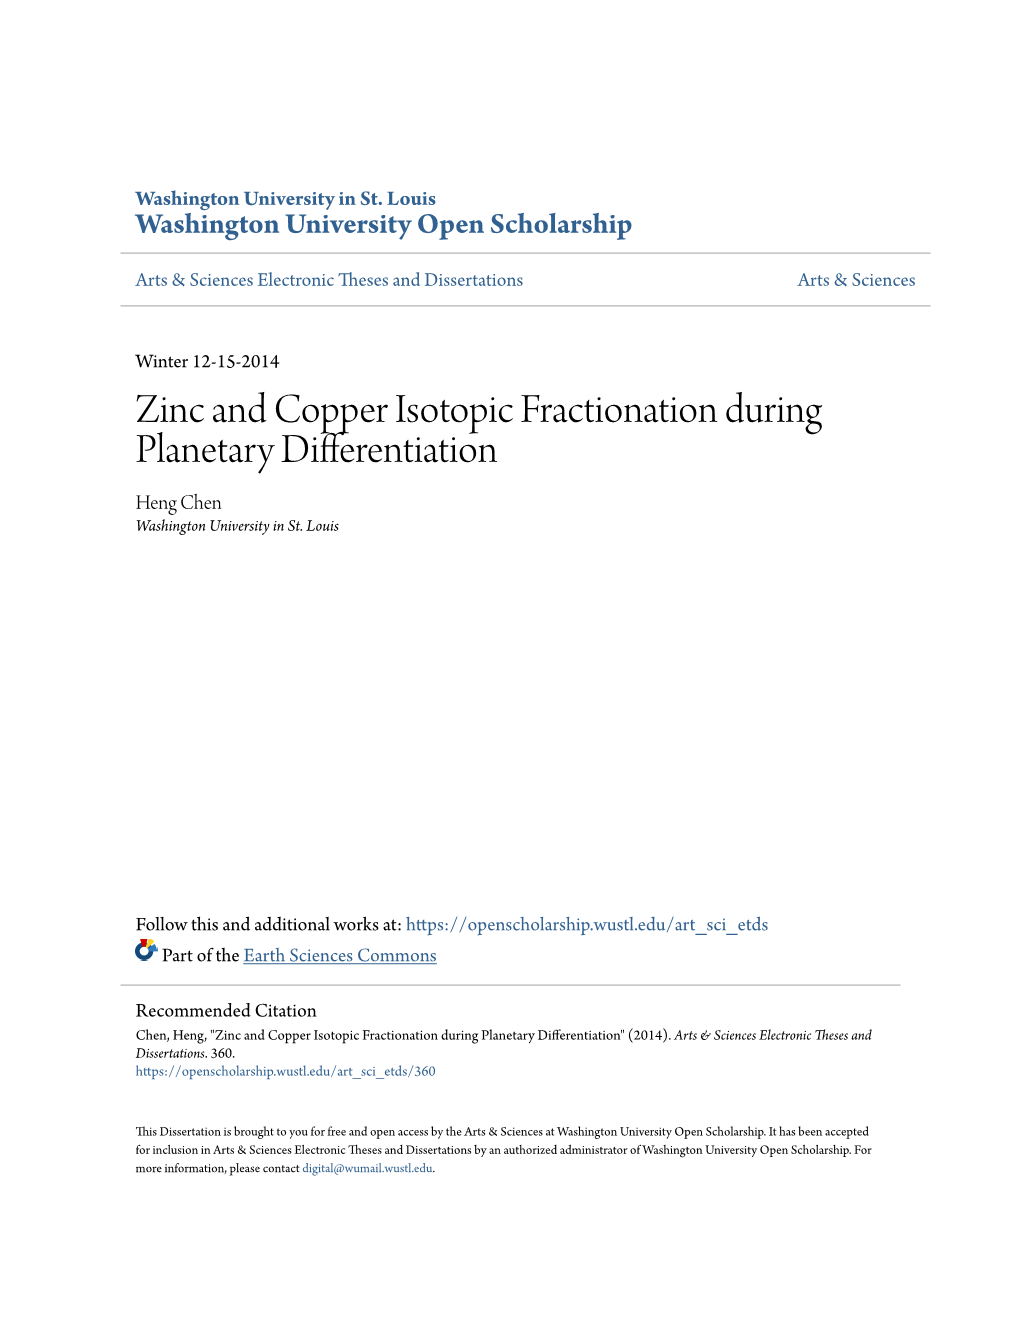 Zinc and Copper Isotopic Fractionation During Planetary Differentiation Heng Chen Washington University in St